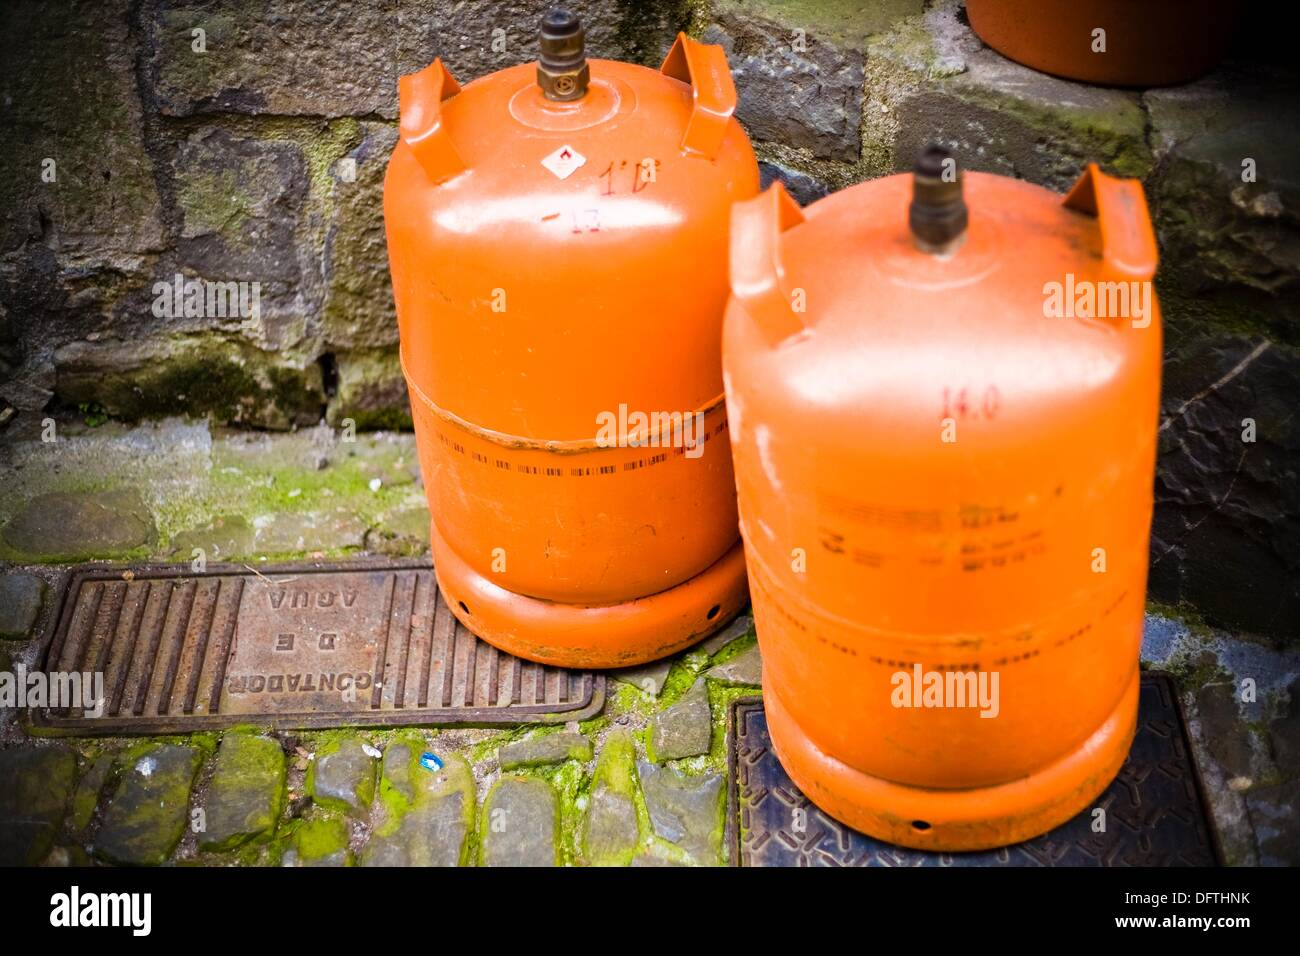 Bombona butano Cut Out Stock Images & Pictures - Alamy